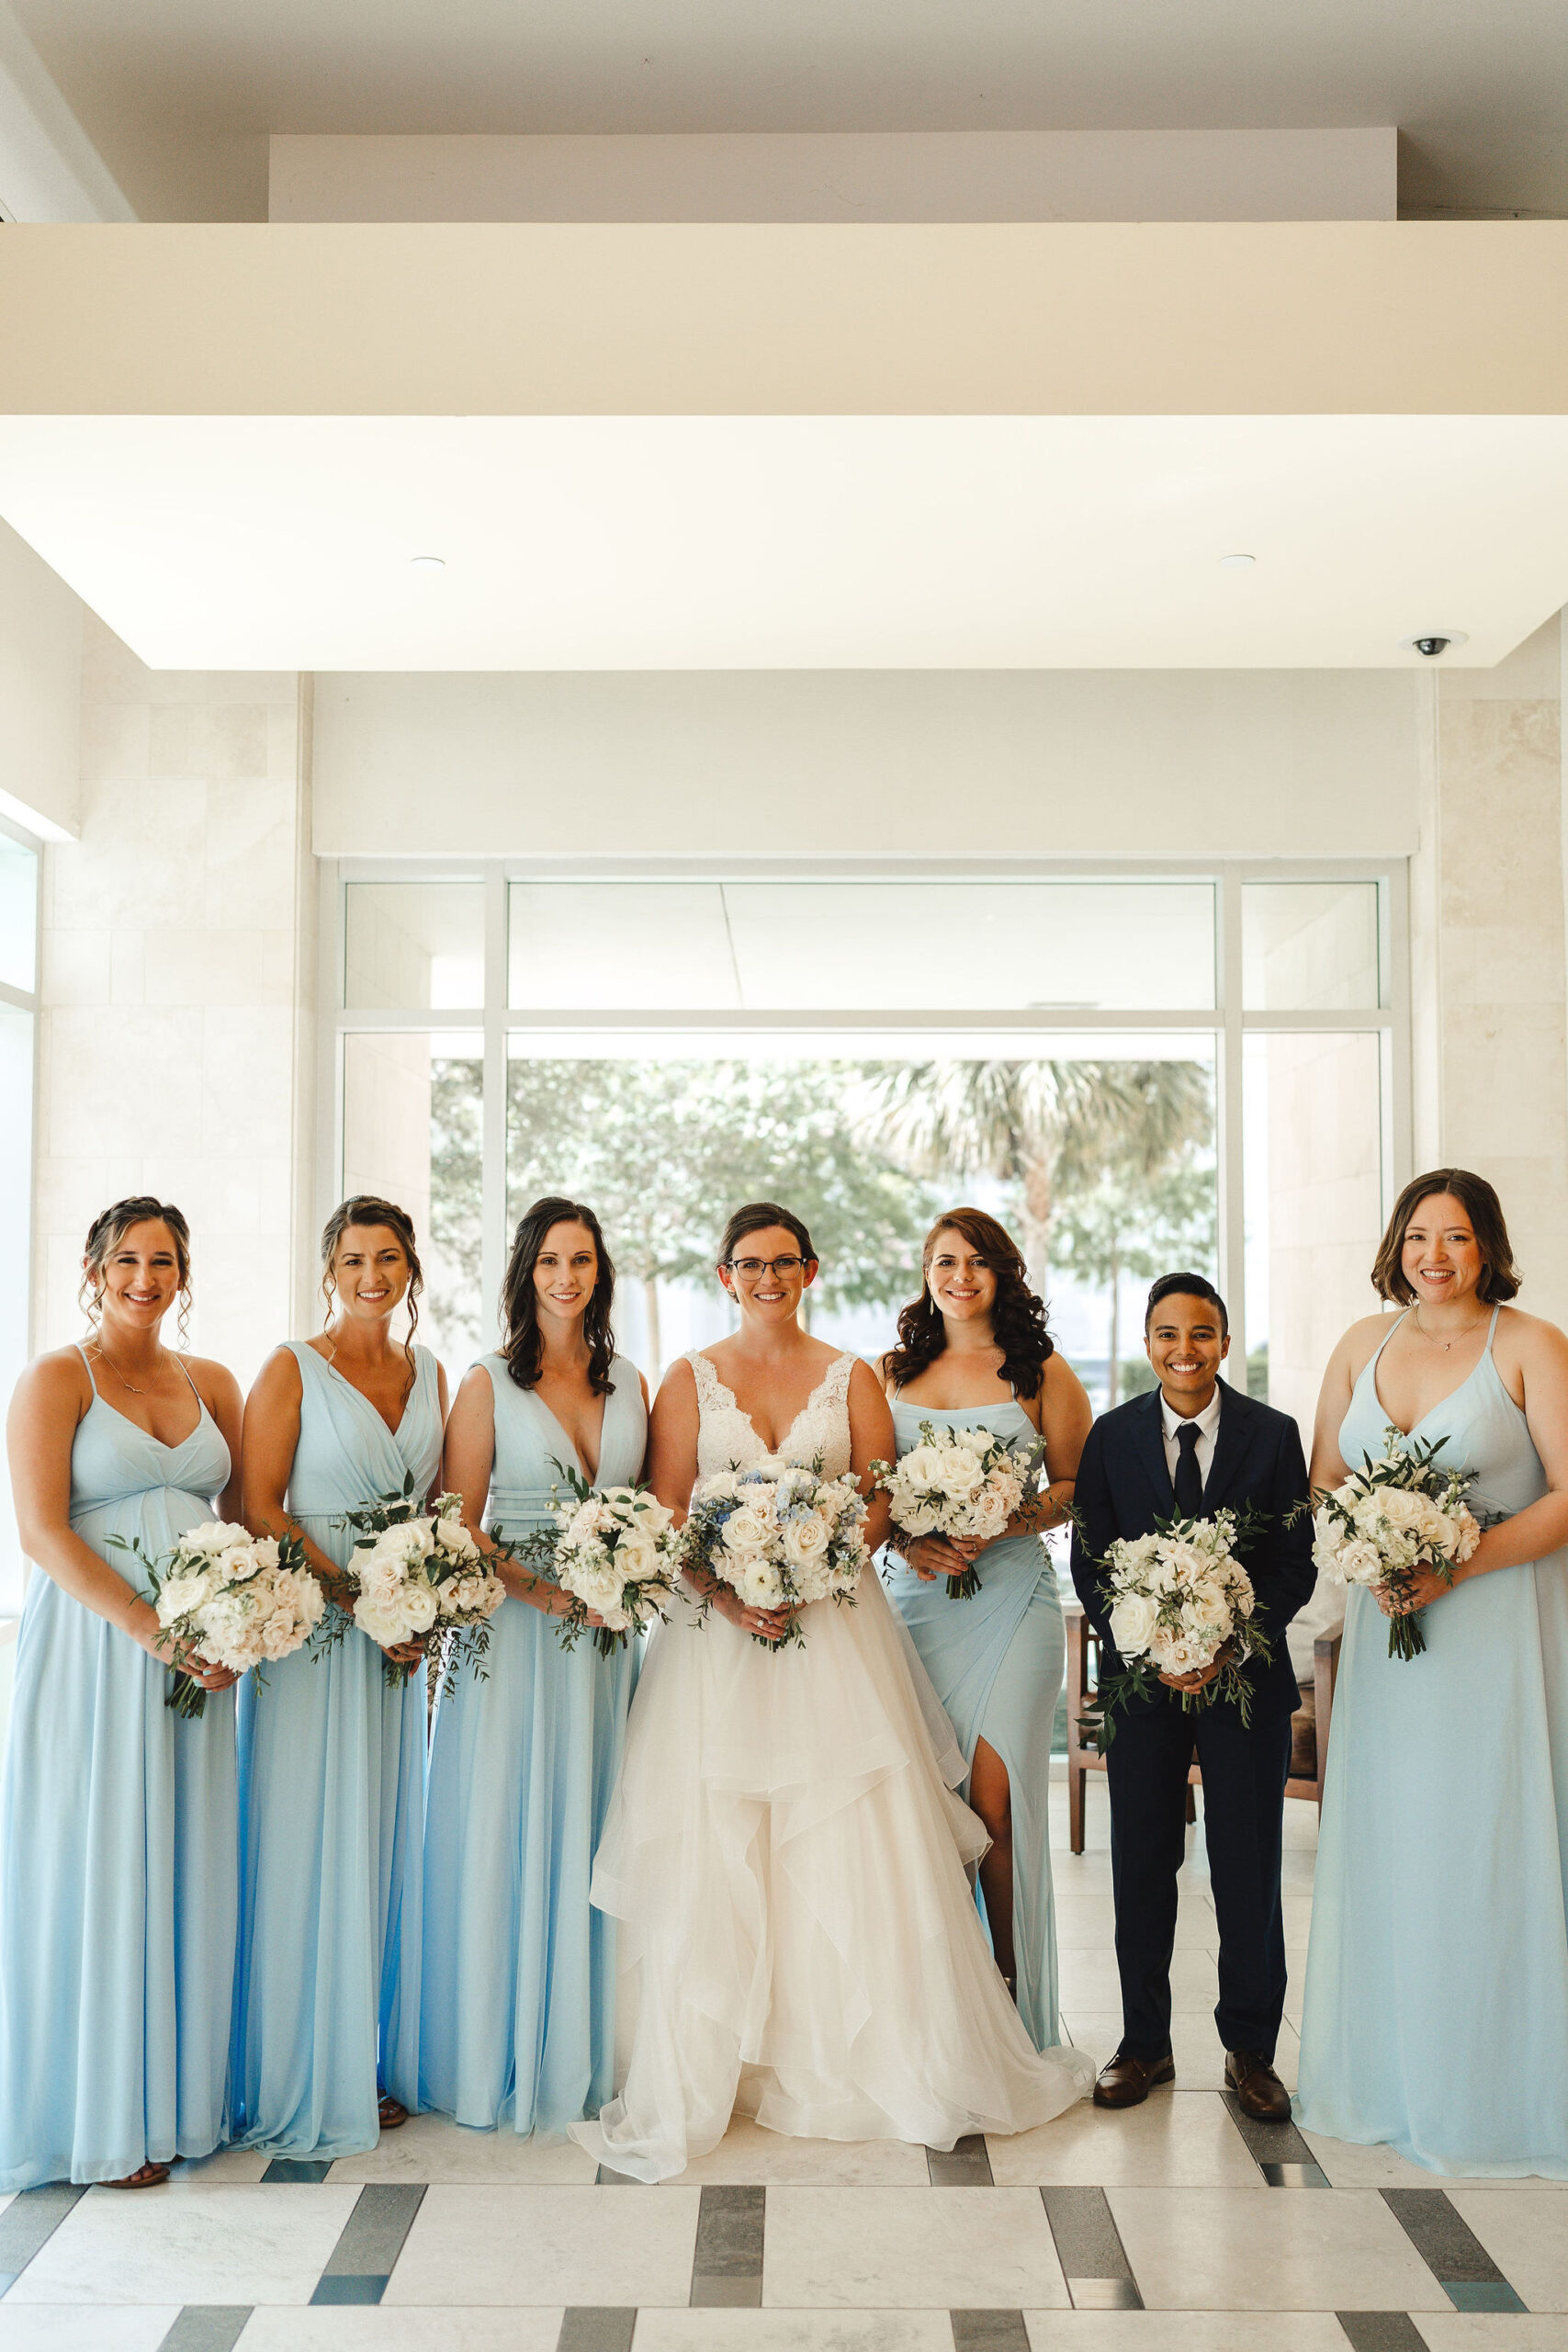 Sky Blue and Navy Bridal Party Bridesmaid Dress and Suit Wedding Ideas